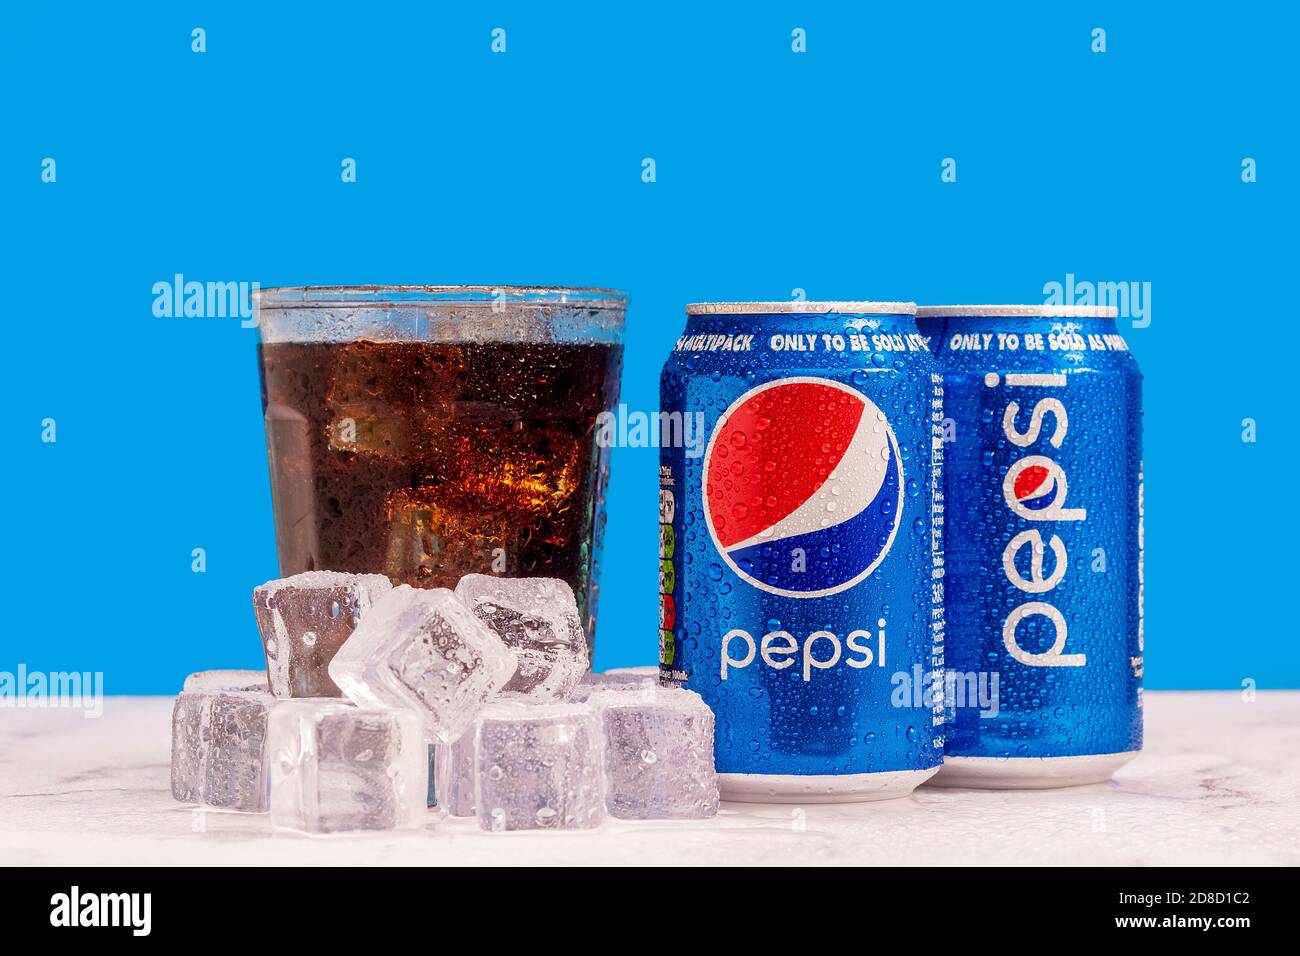 London, United Kingdom - October 29 2020:  Ice cold can of Pepsi next to a full glass of soda with ice cubes and condensation on a blue background. Stock Photo